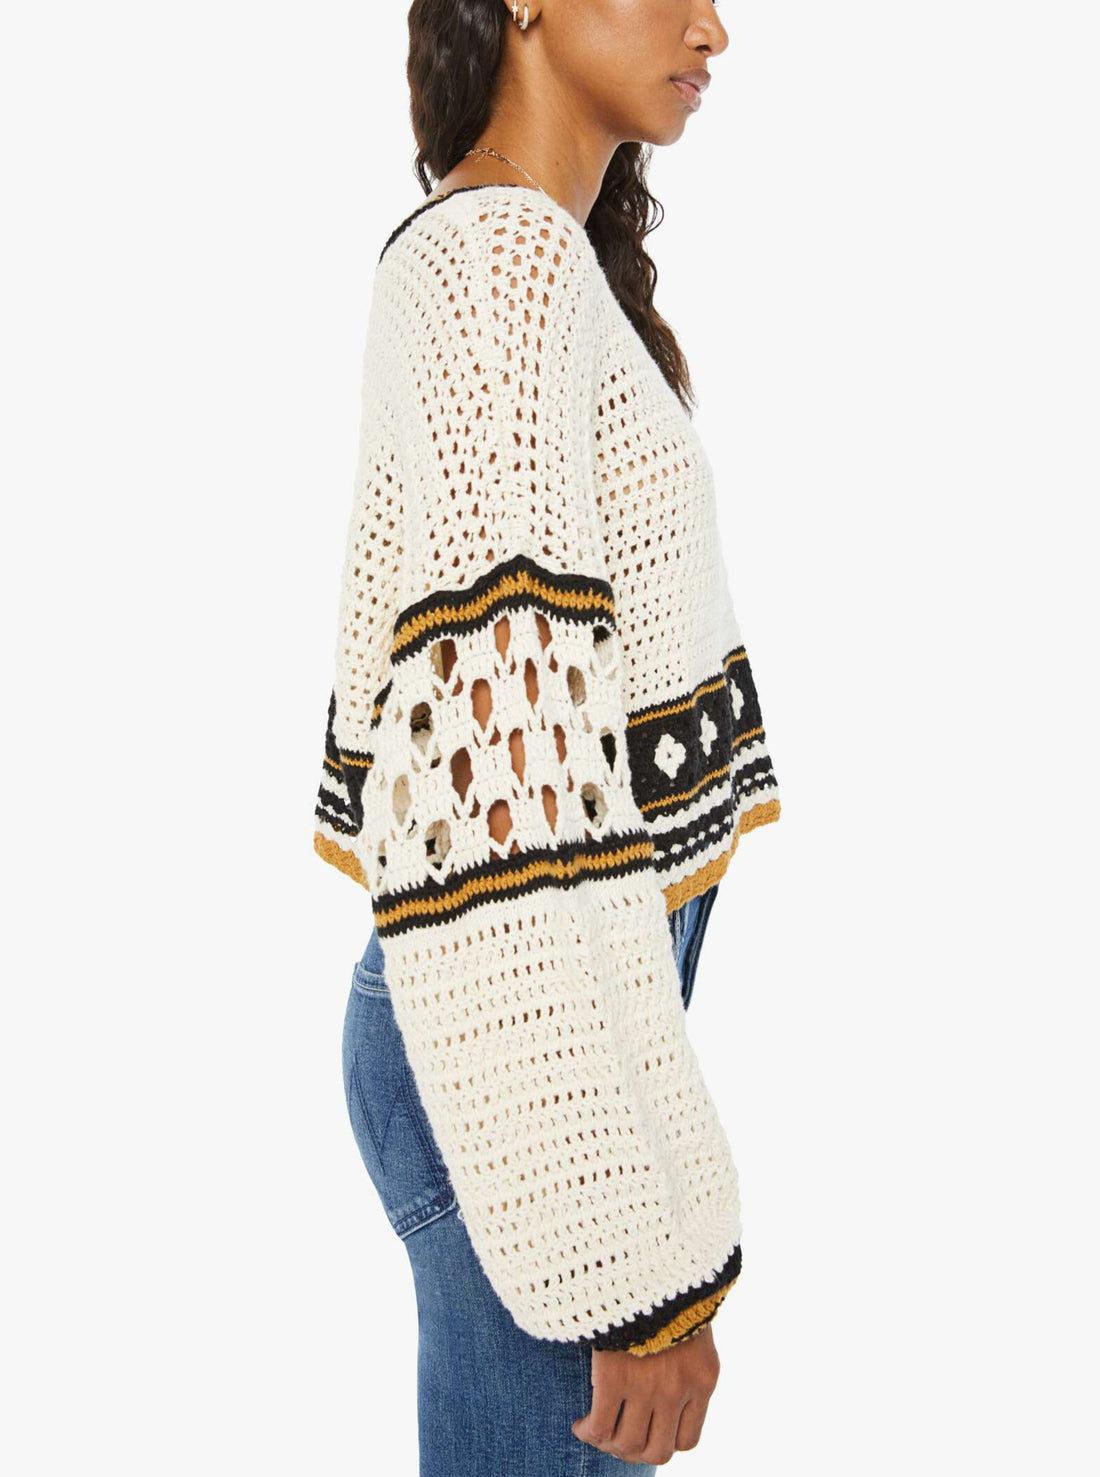 The Bell Sleeve Pull Over